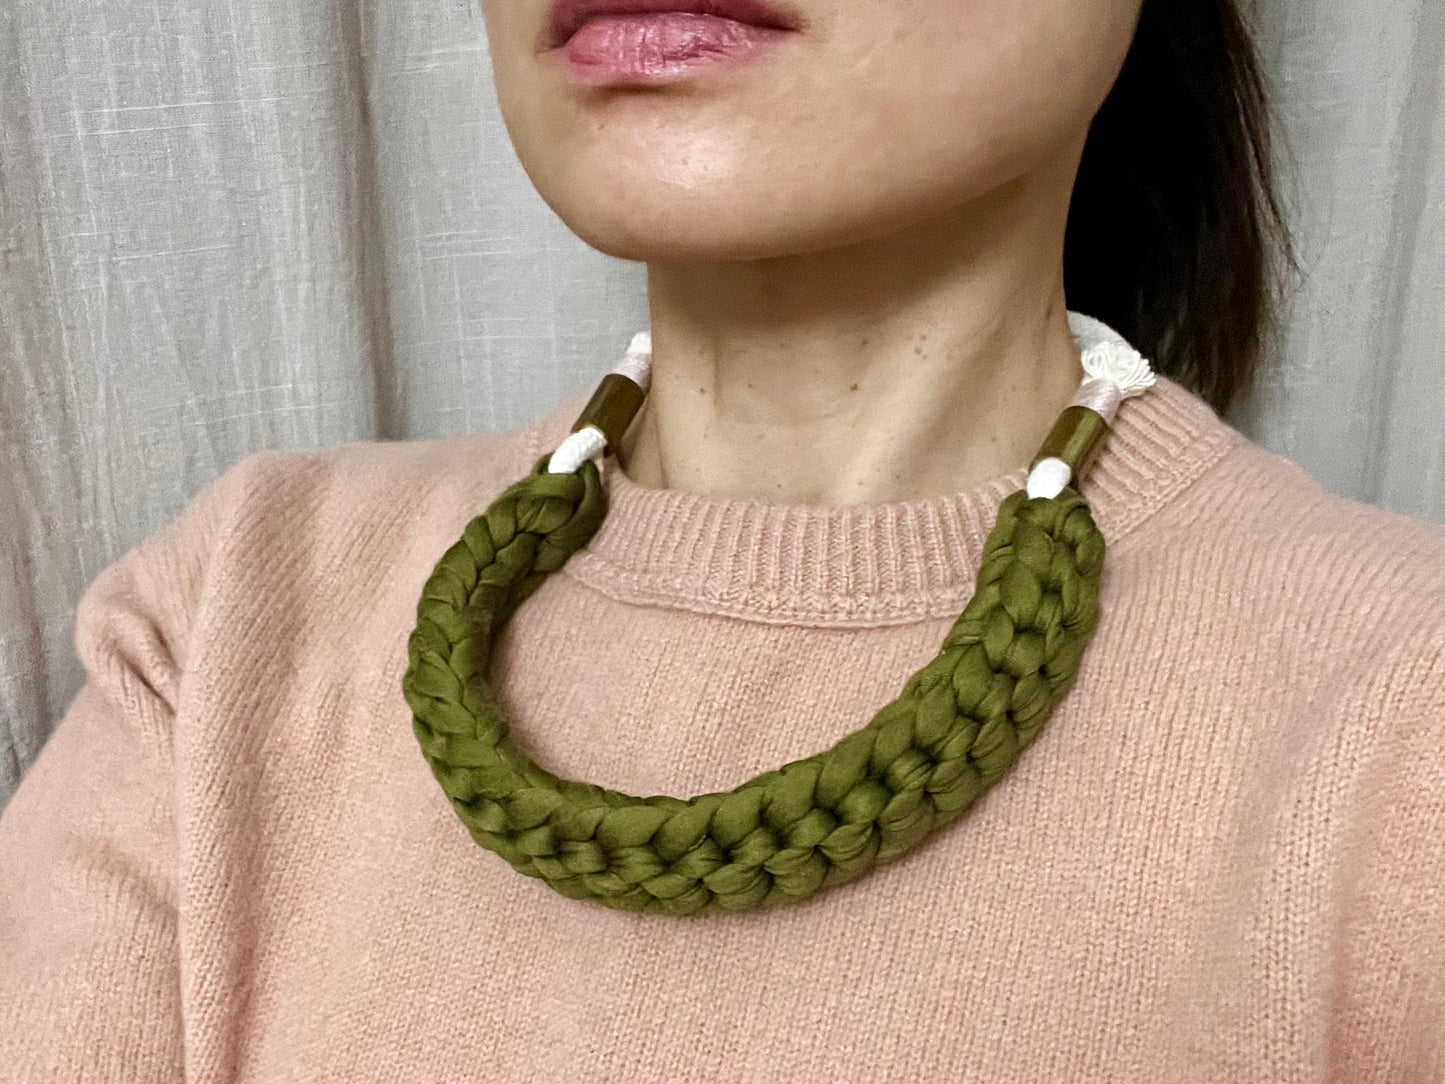 Crocheted olive green necklace